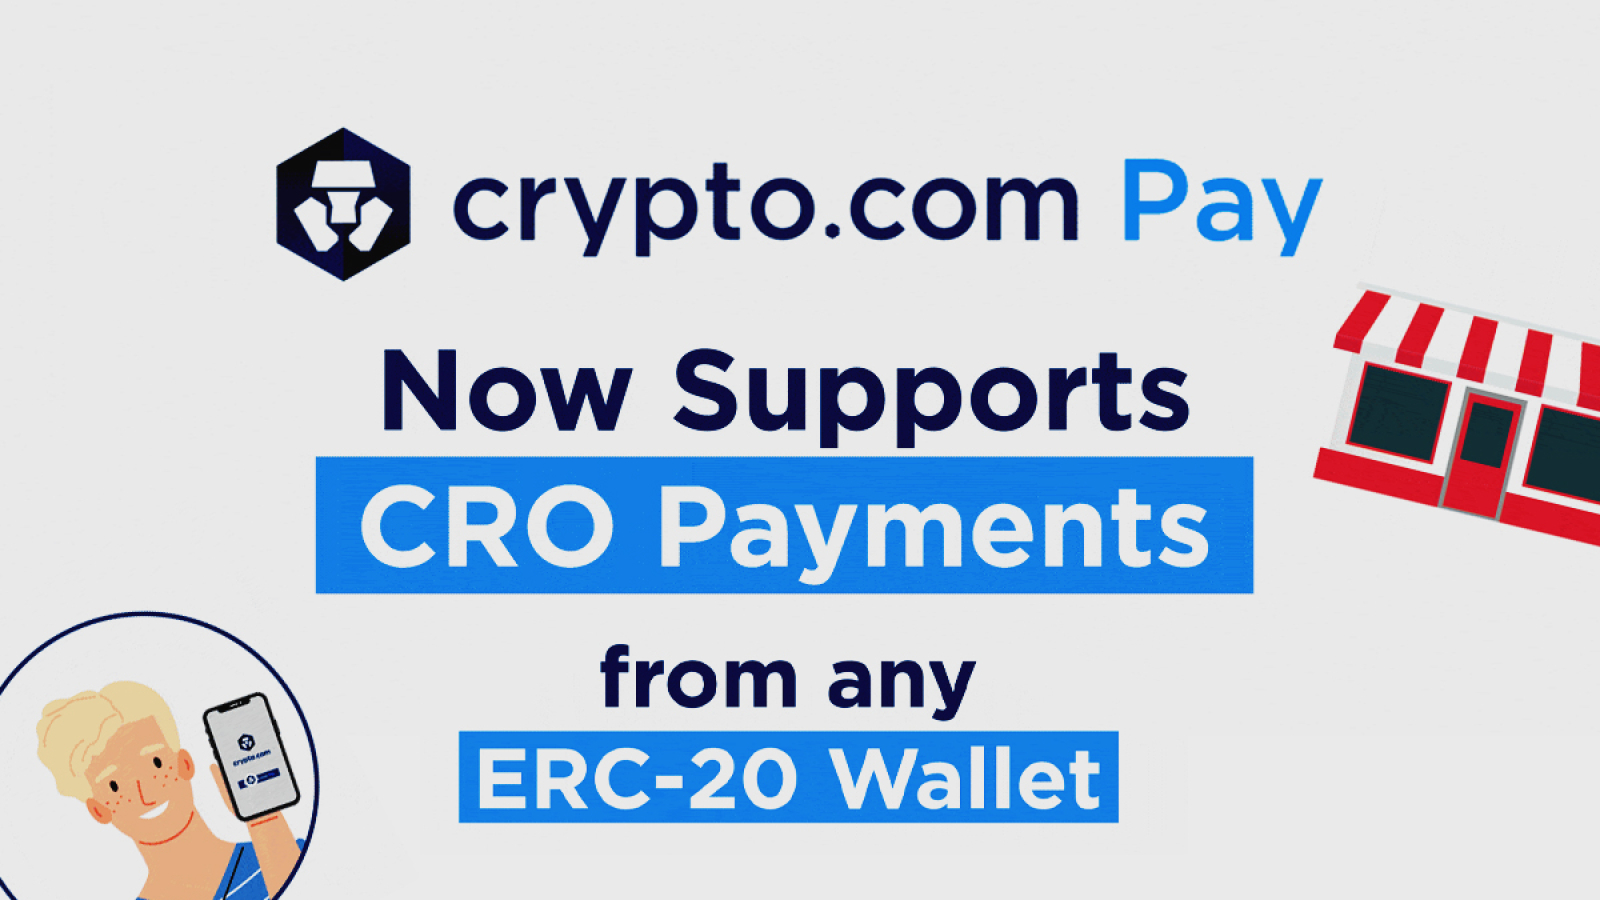 Crypto.com Pay Now Powers CRO Payments From Any ERC-20 Wallet